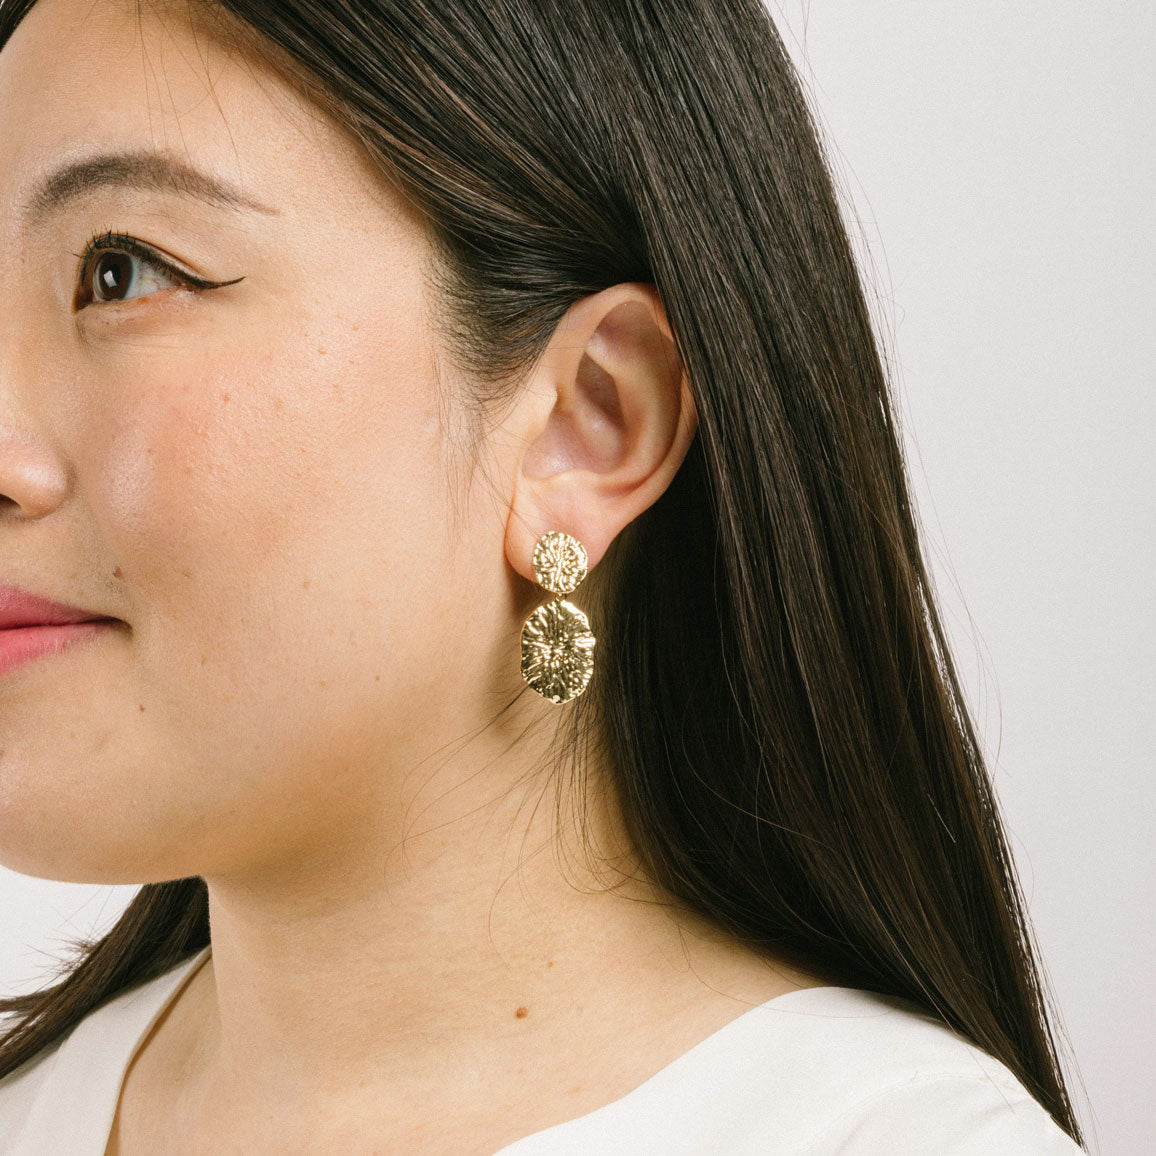 A model wearing the Daiquiri Drop Clip On Earrings in Gold feature a secure, padded clip-on closure ideal for all ear types, offering up to 12 hours of comfortable wear. Crafted from Zinc and Copper alloy, these earrings come as a single pair with removable rubber padding.